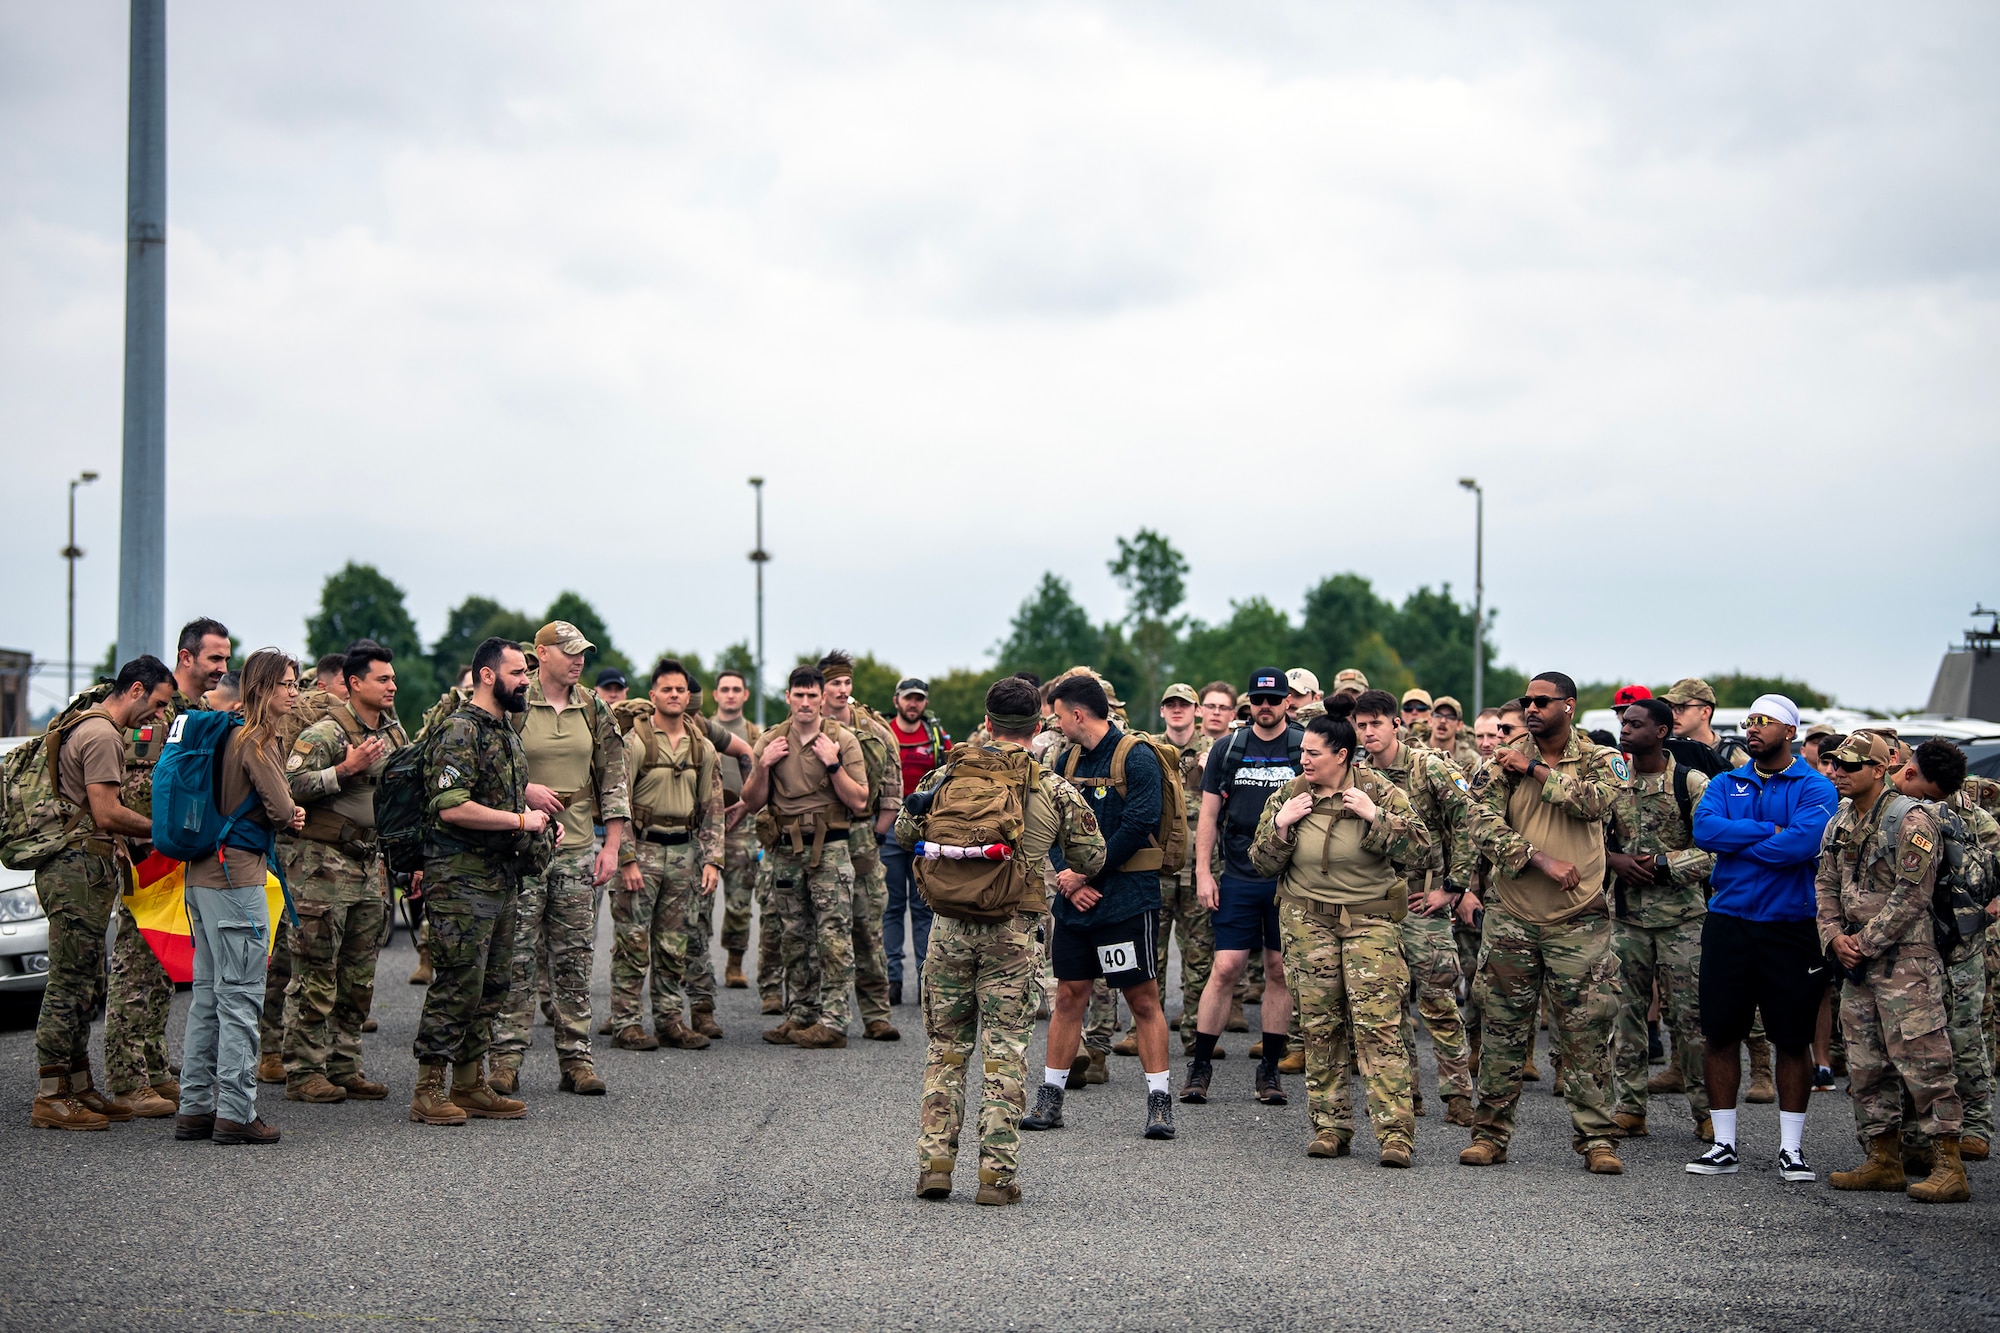 Staff Sgt. Josten Lacey, center, 423d Security Forces Squadron Assistant NCO in Charge of training, briefs ruck march participants at RAF Molesworth, England, Aug. 18, 2023. Over 100 personnel from the 501st CSW and mission partner units participated in a 25 Kilometer Danish Contingent ruck march, which allowed them to test their physical capabilities and encouraged social bonds between joint forces. The DANCON ruck march has been completed in numerous countries throughout the world since it was established in 1972. (U.S. Air Force photo by Staff Sgt. Eugene Oliver)